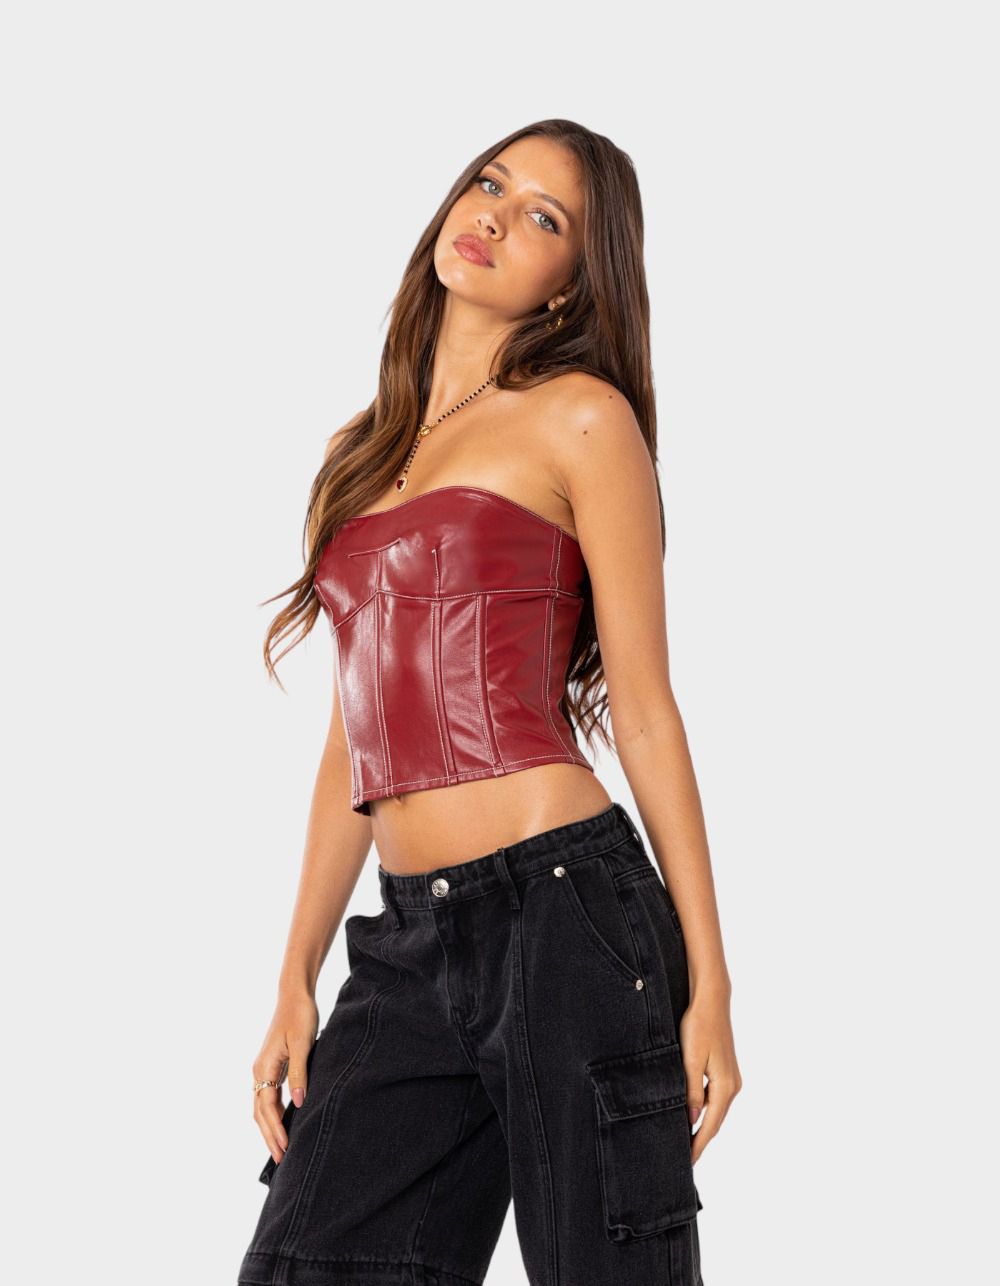 EDIKTED Moss Faux Leather Lace Up Womens Corset Top | Tillys